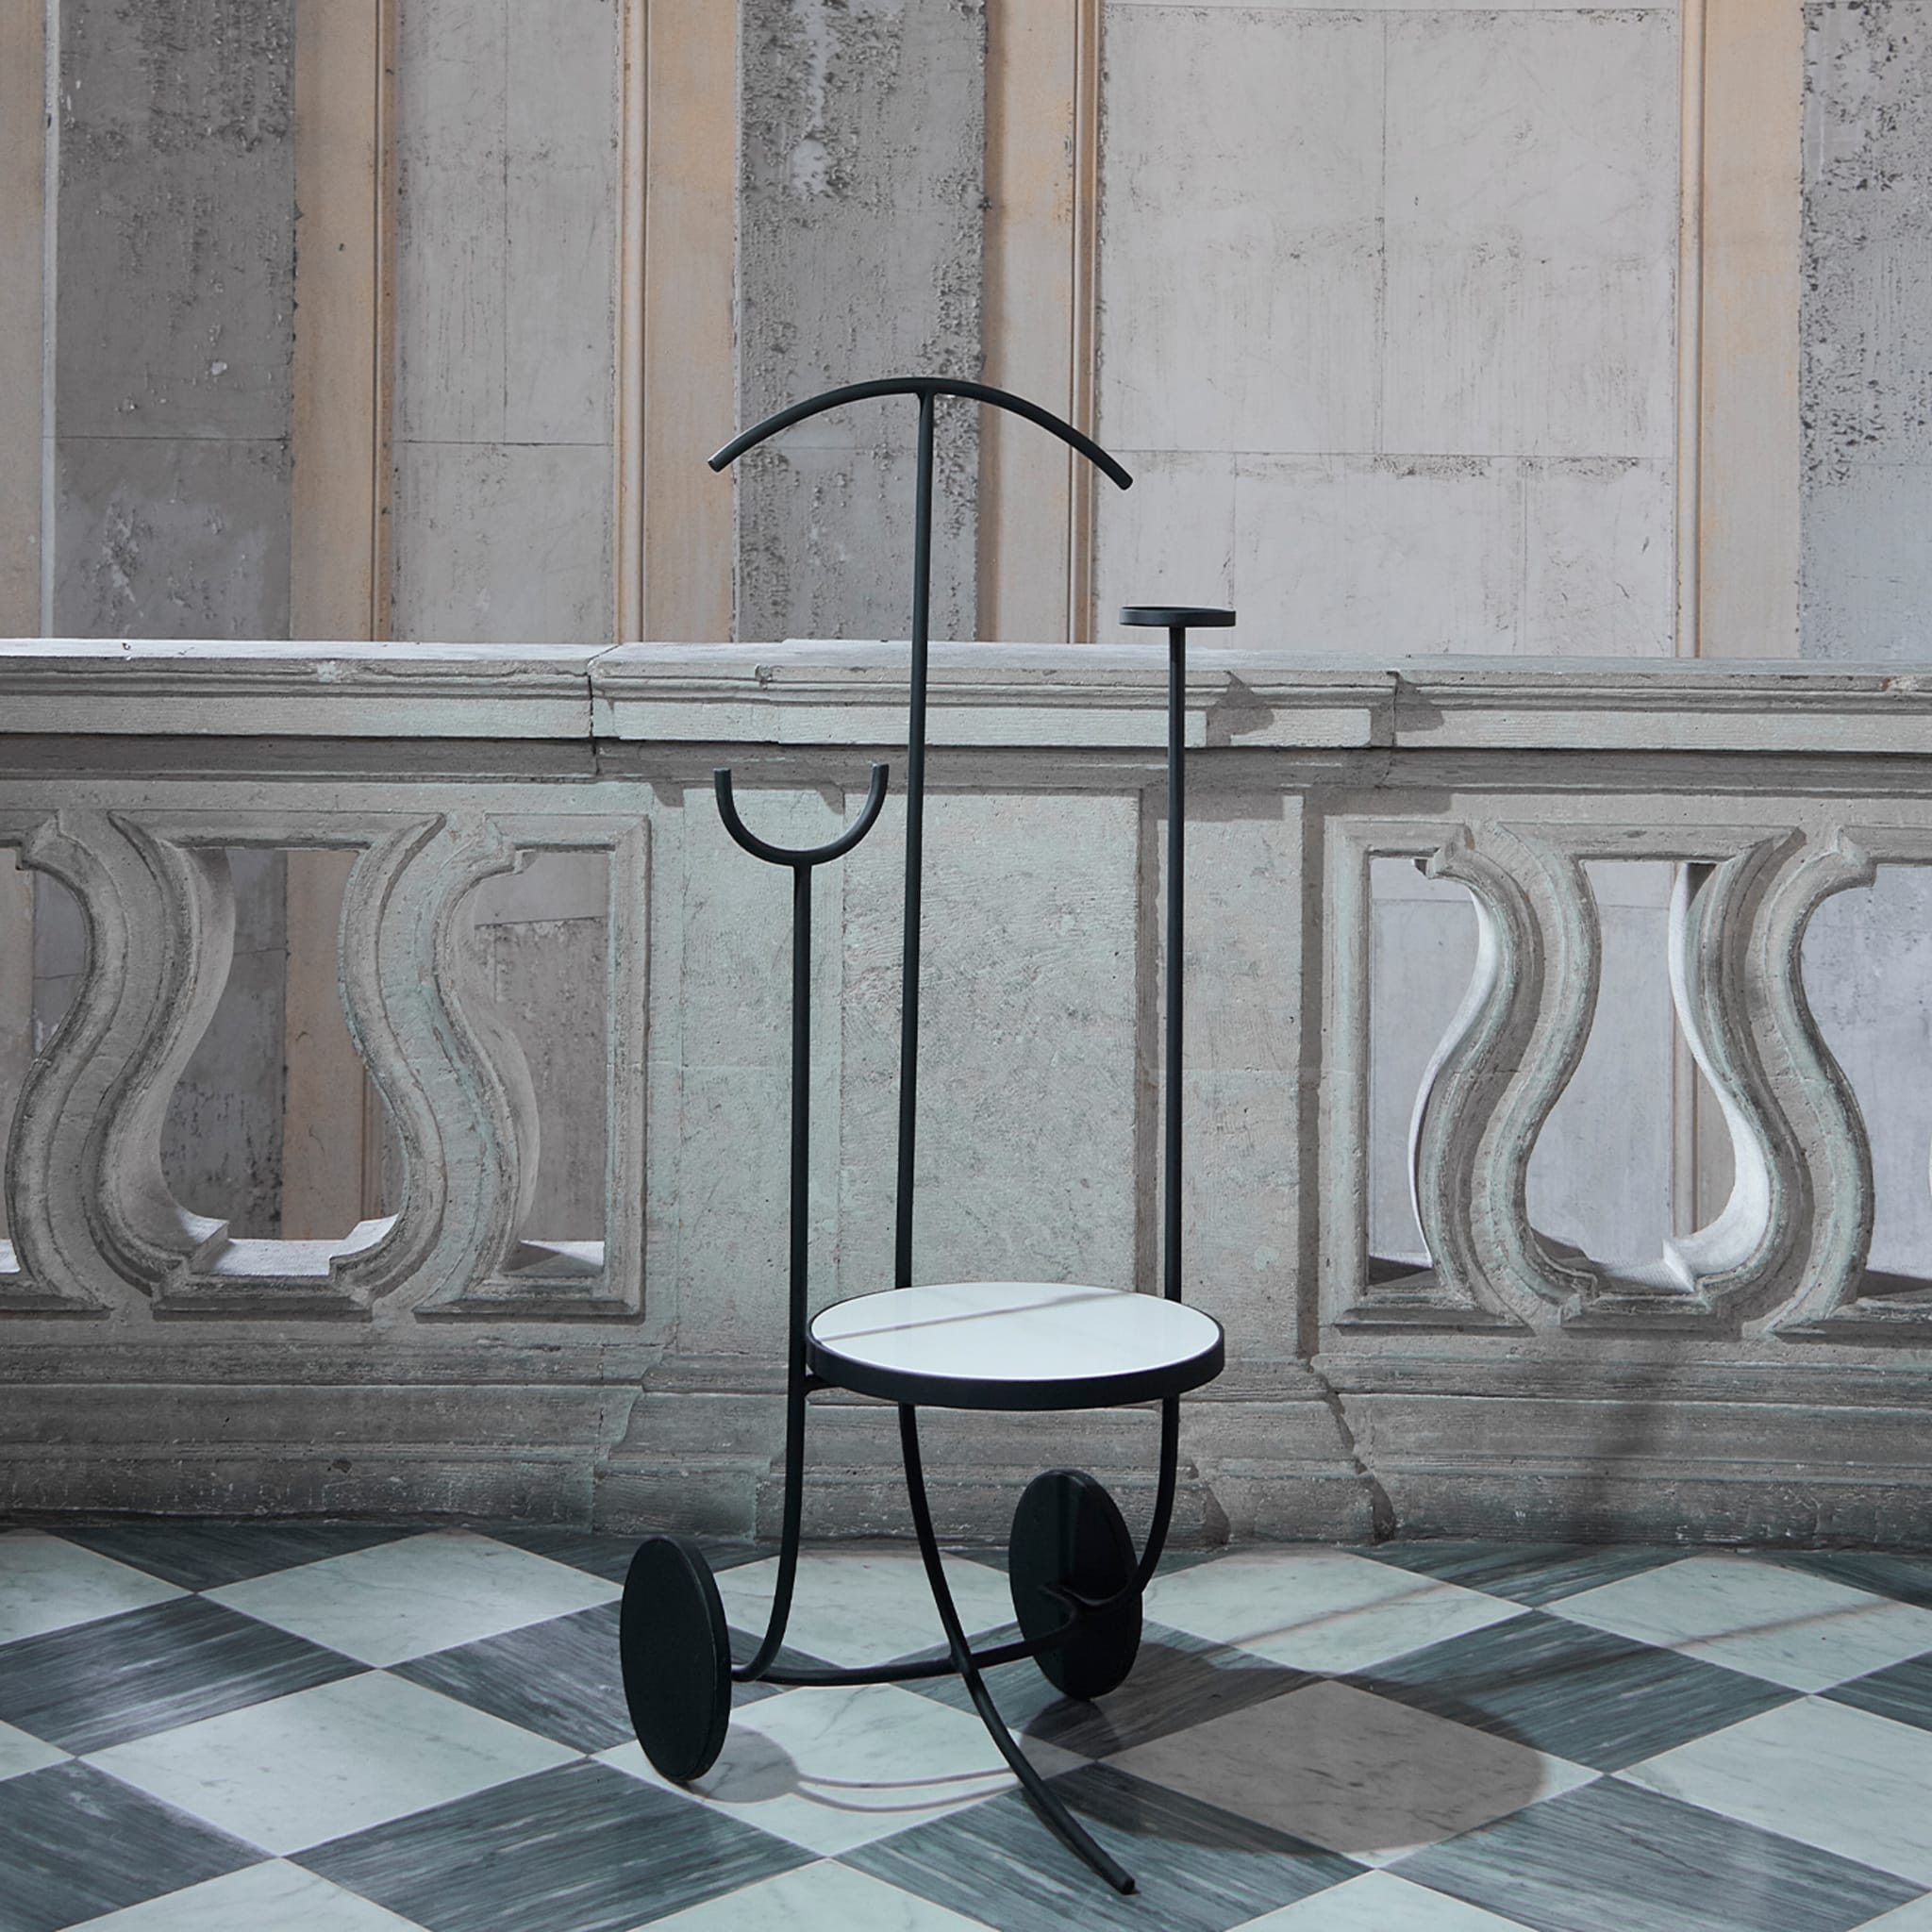 Amonì Valet Stand Limited Edition by Linda Salvatori Limited Edition - Alternative view 3